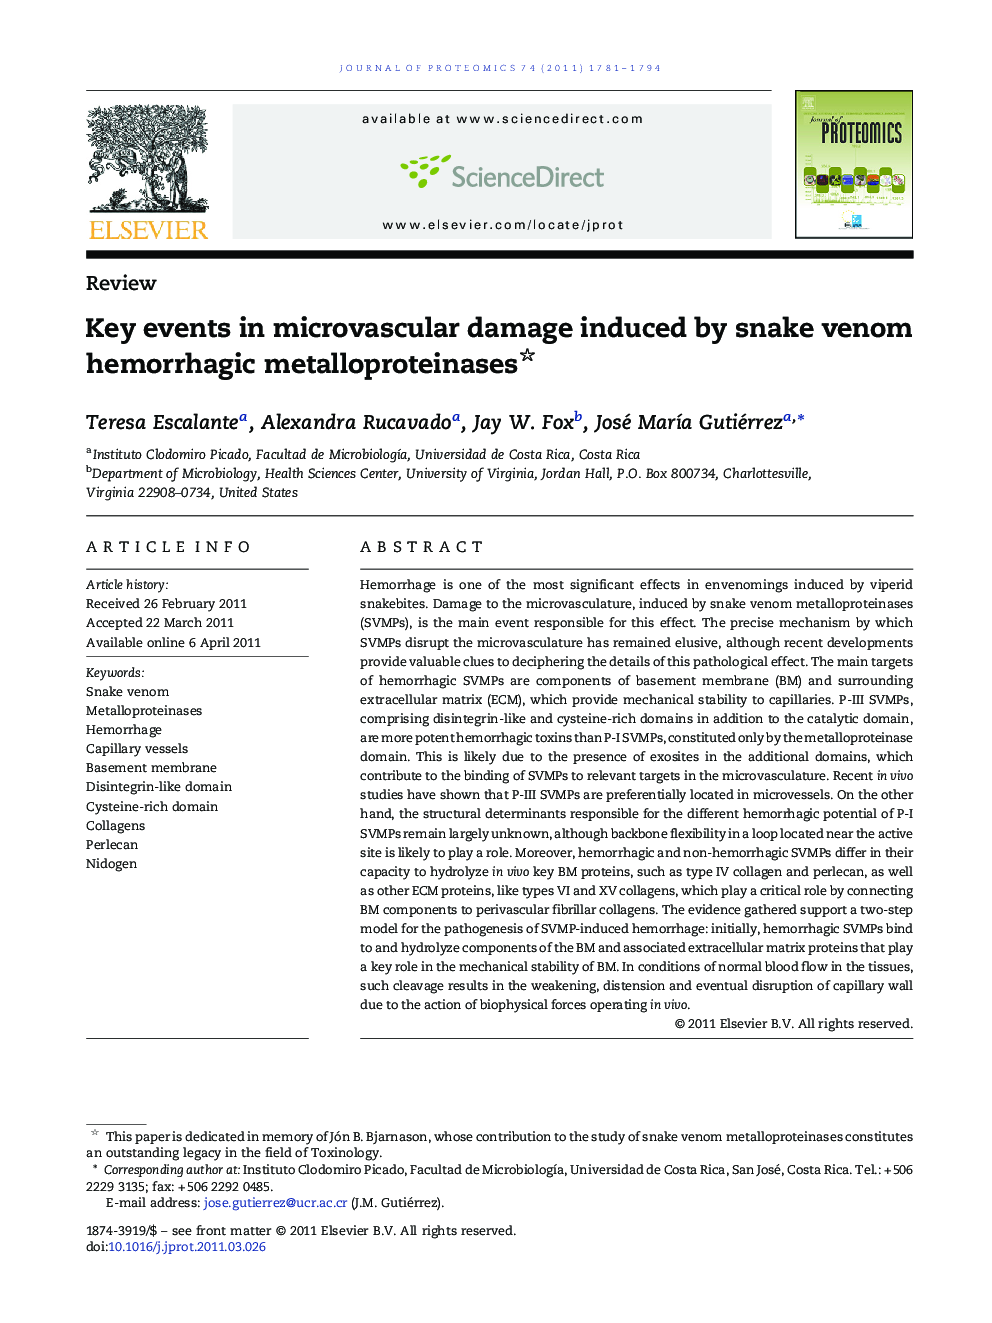 Key events in microvascular damage induced by snake venom hemorrhagic metalloproteinases 